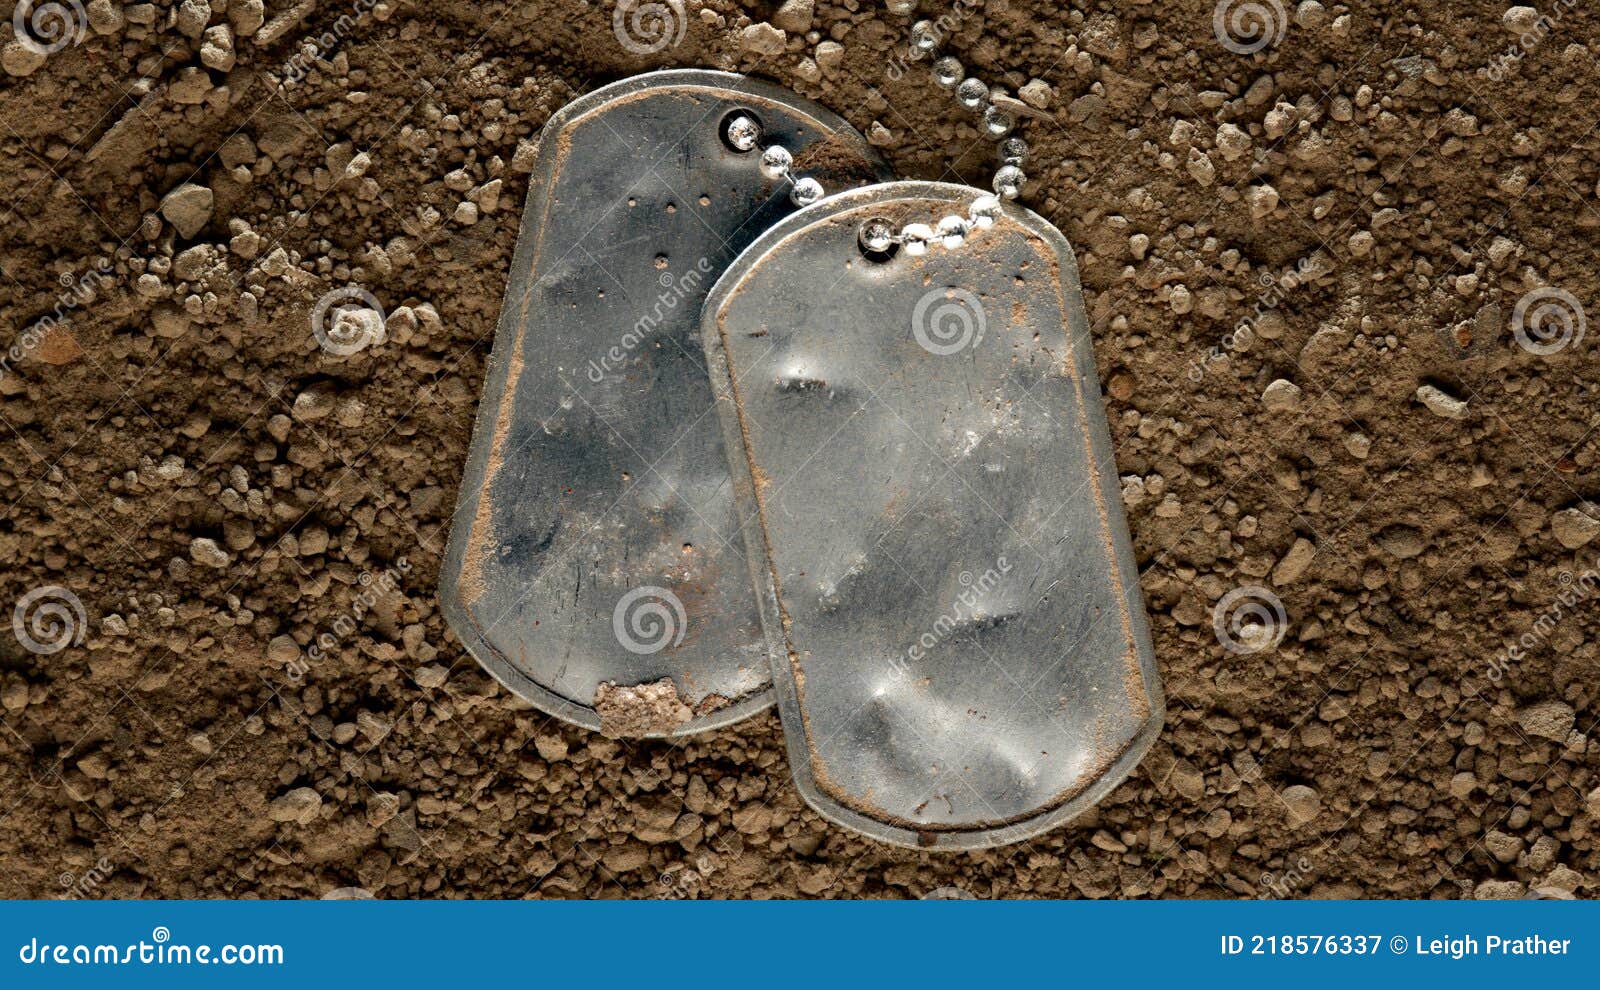 dented and worn blank military dog tags